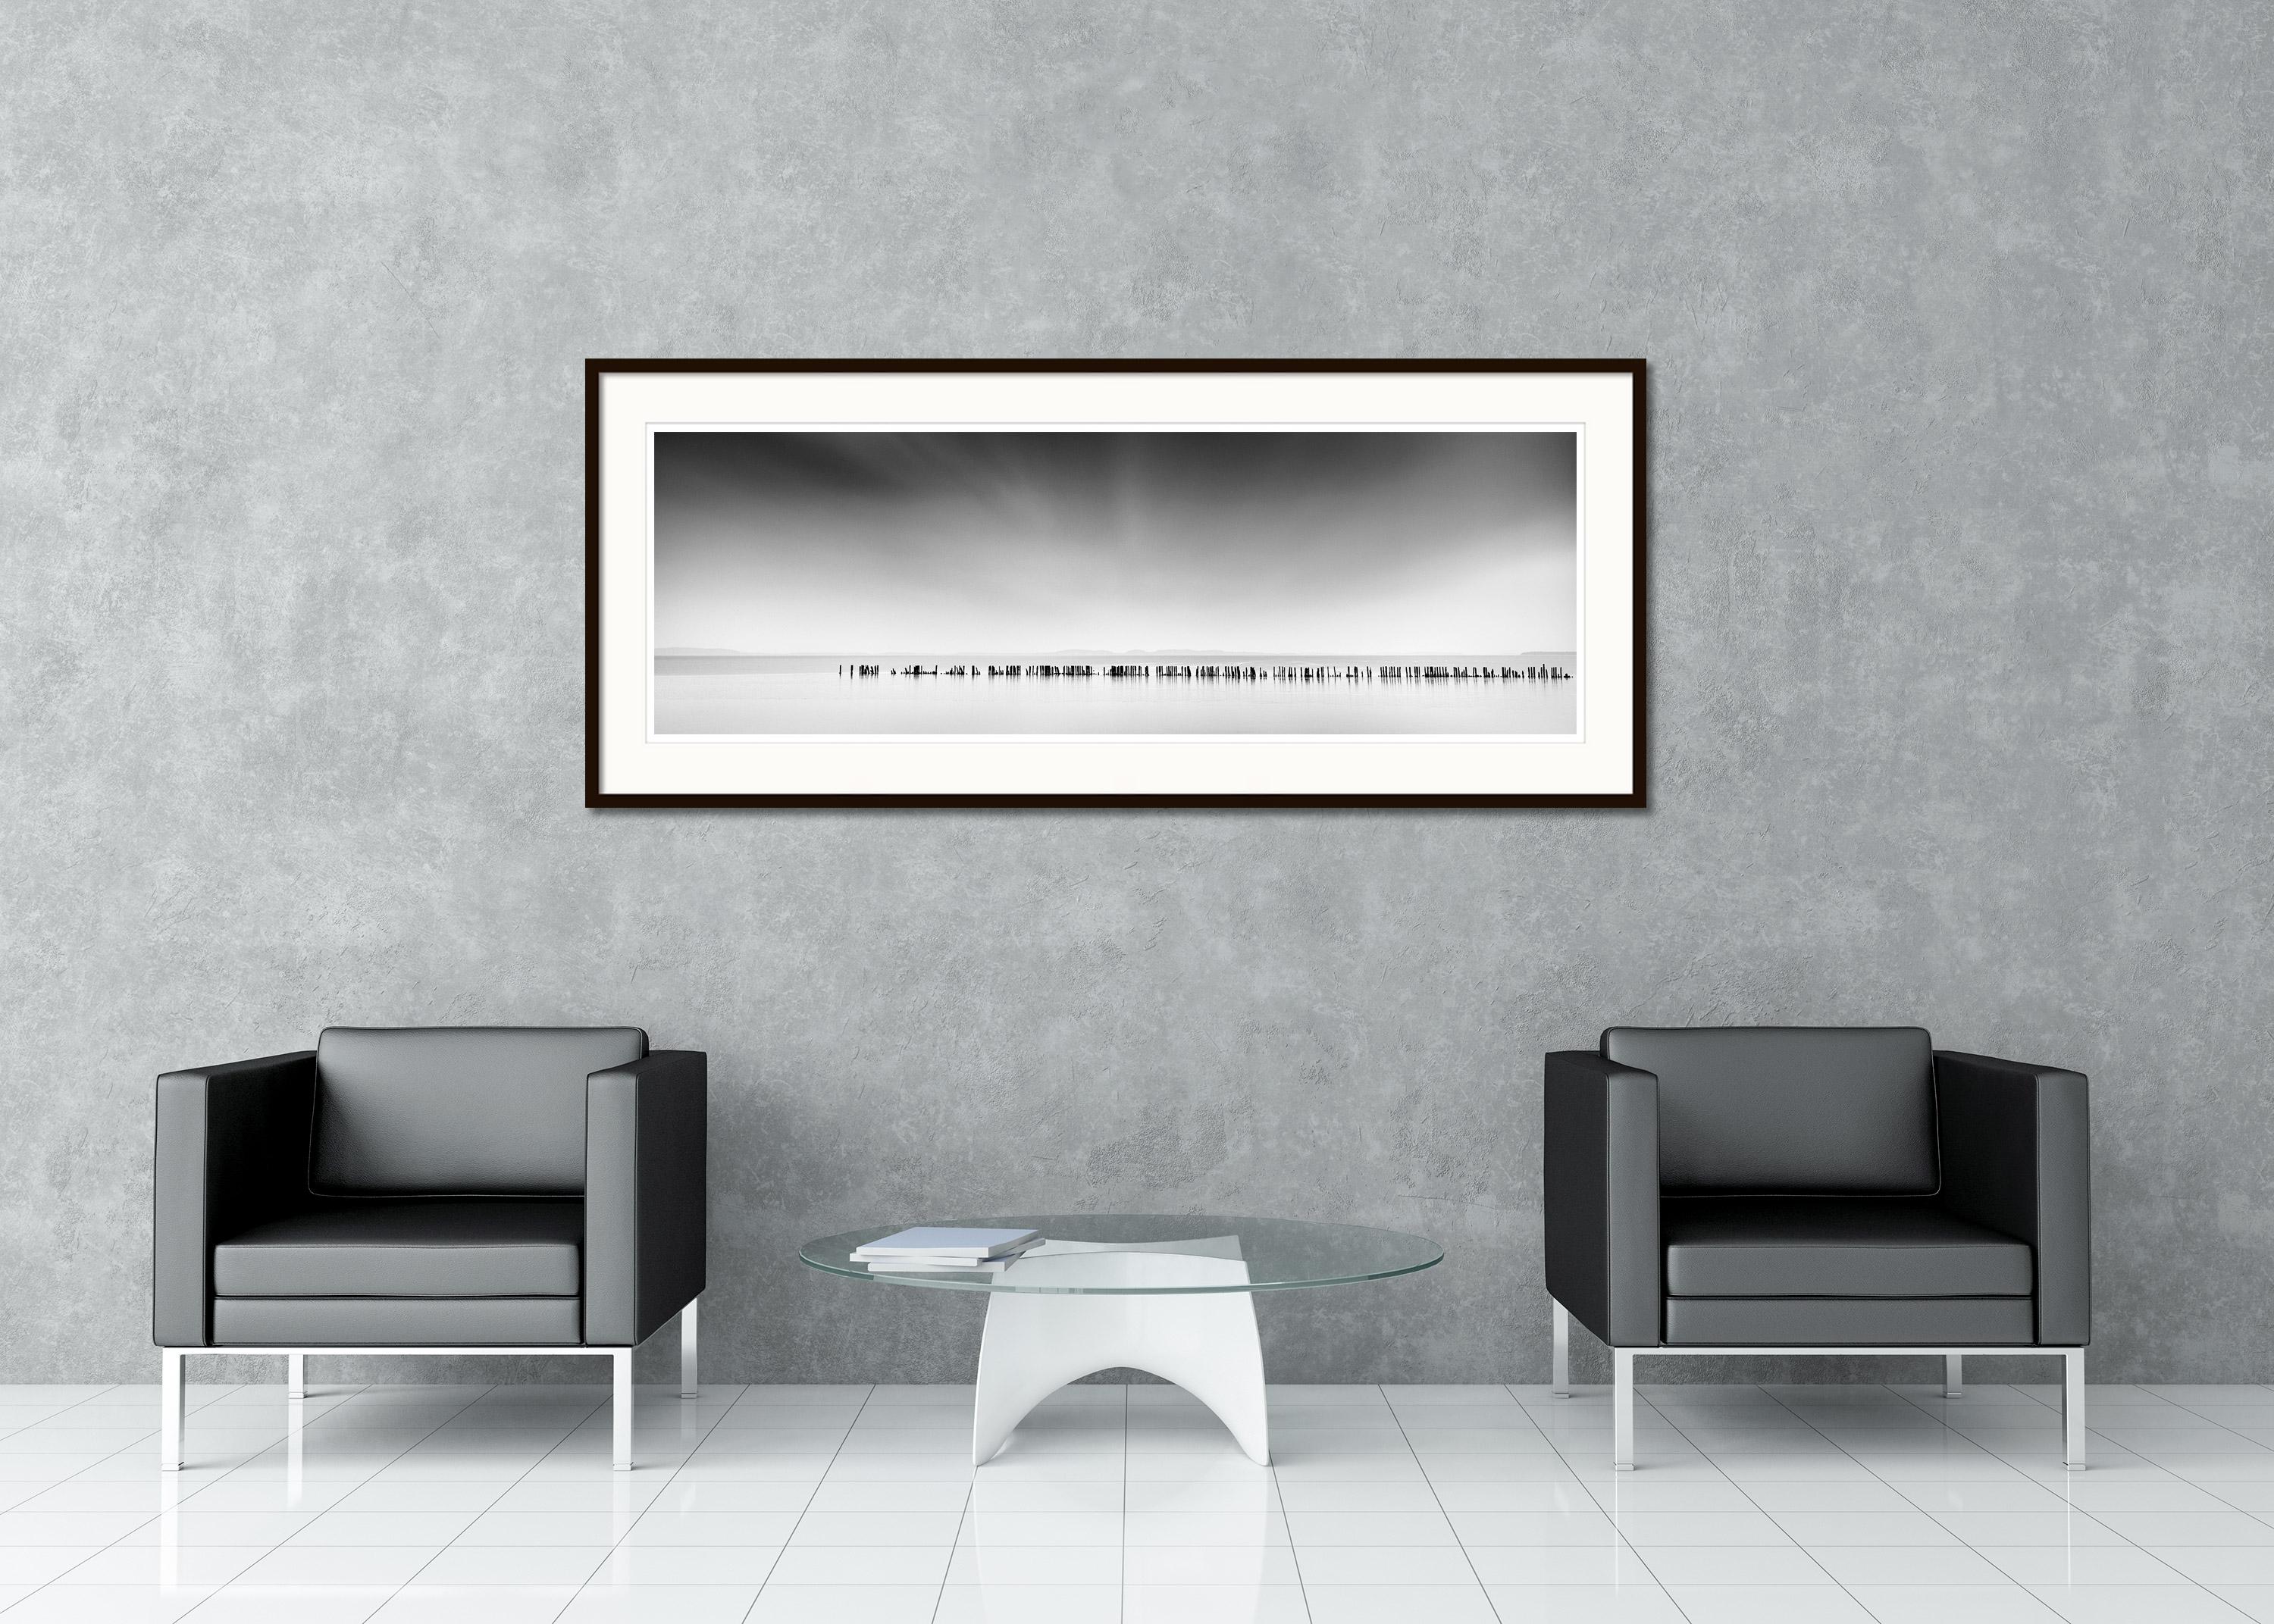 Black and White Fine Art panorama long exposure waterscape photography. Archival pigment ink print, edition of 7. Signed, titled, dated and numbered by artist. Certificate of authenticity included. Printed with 4cm white border. 
International award